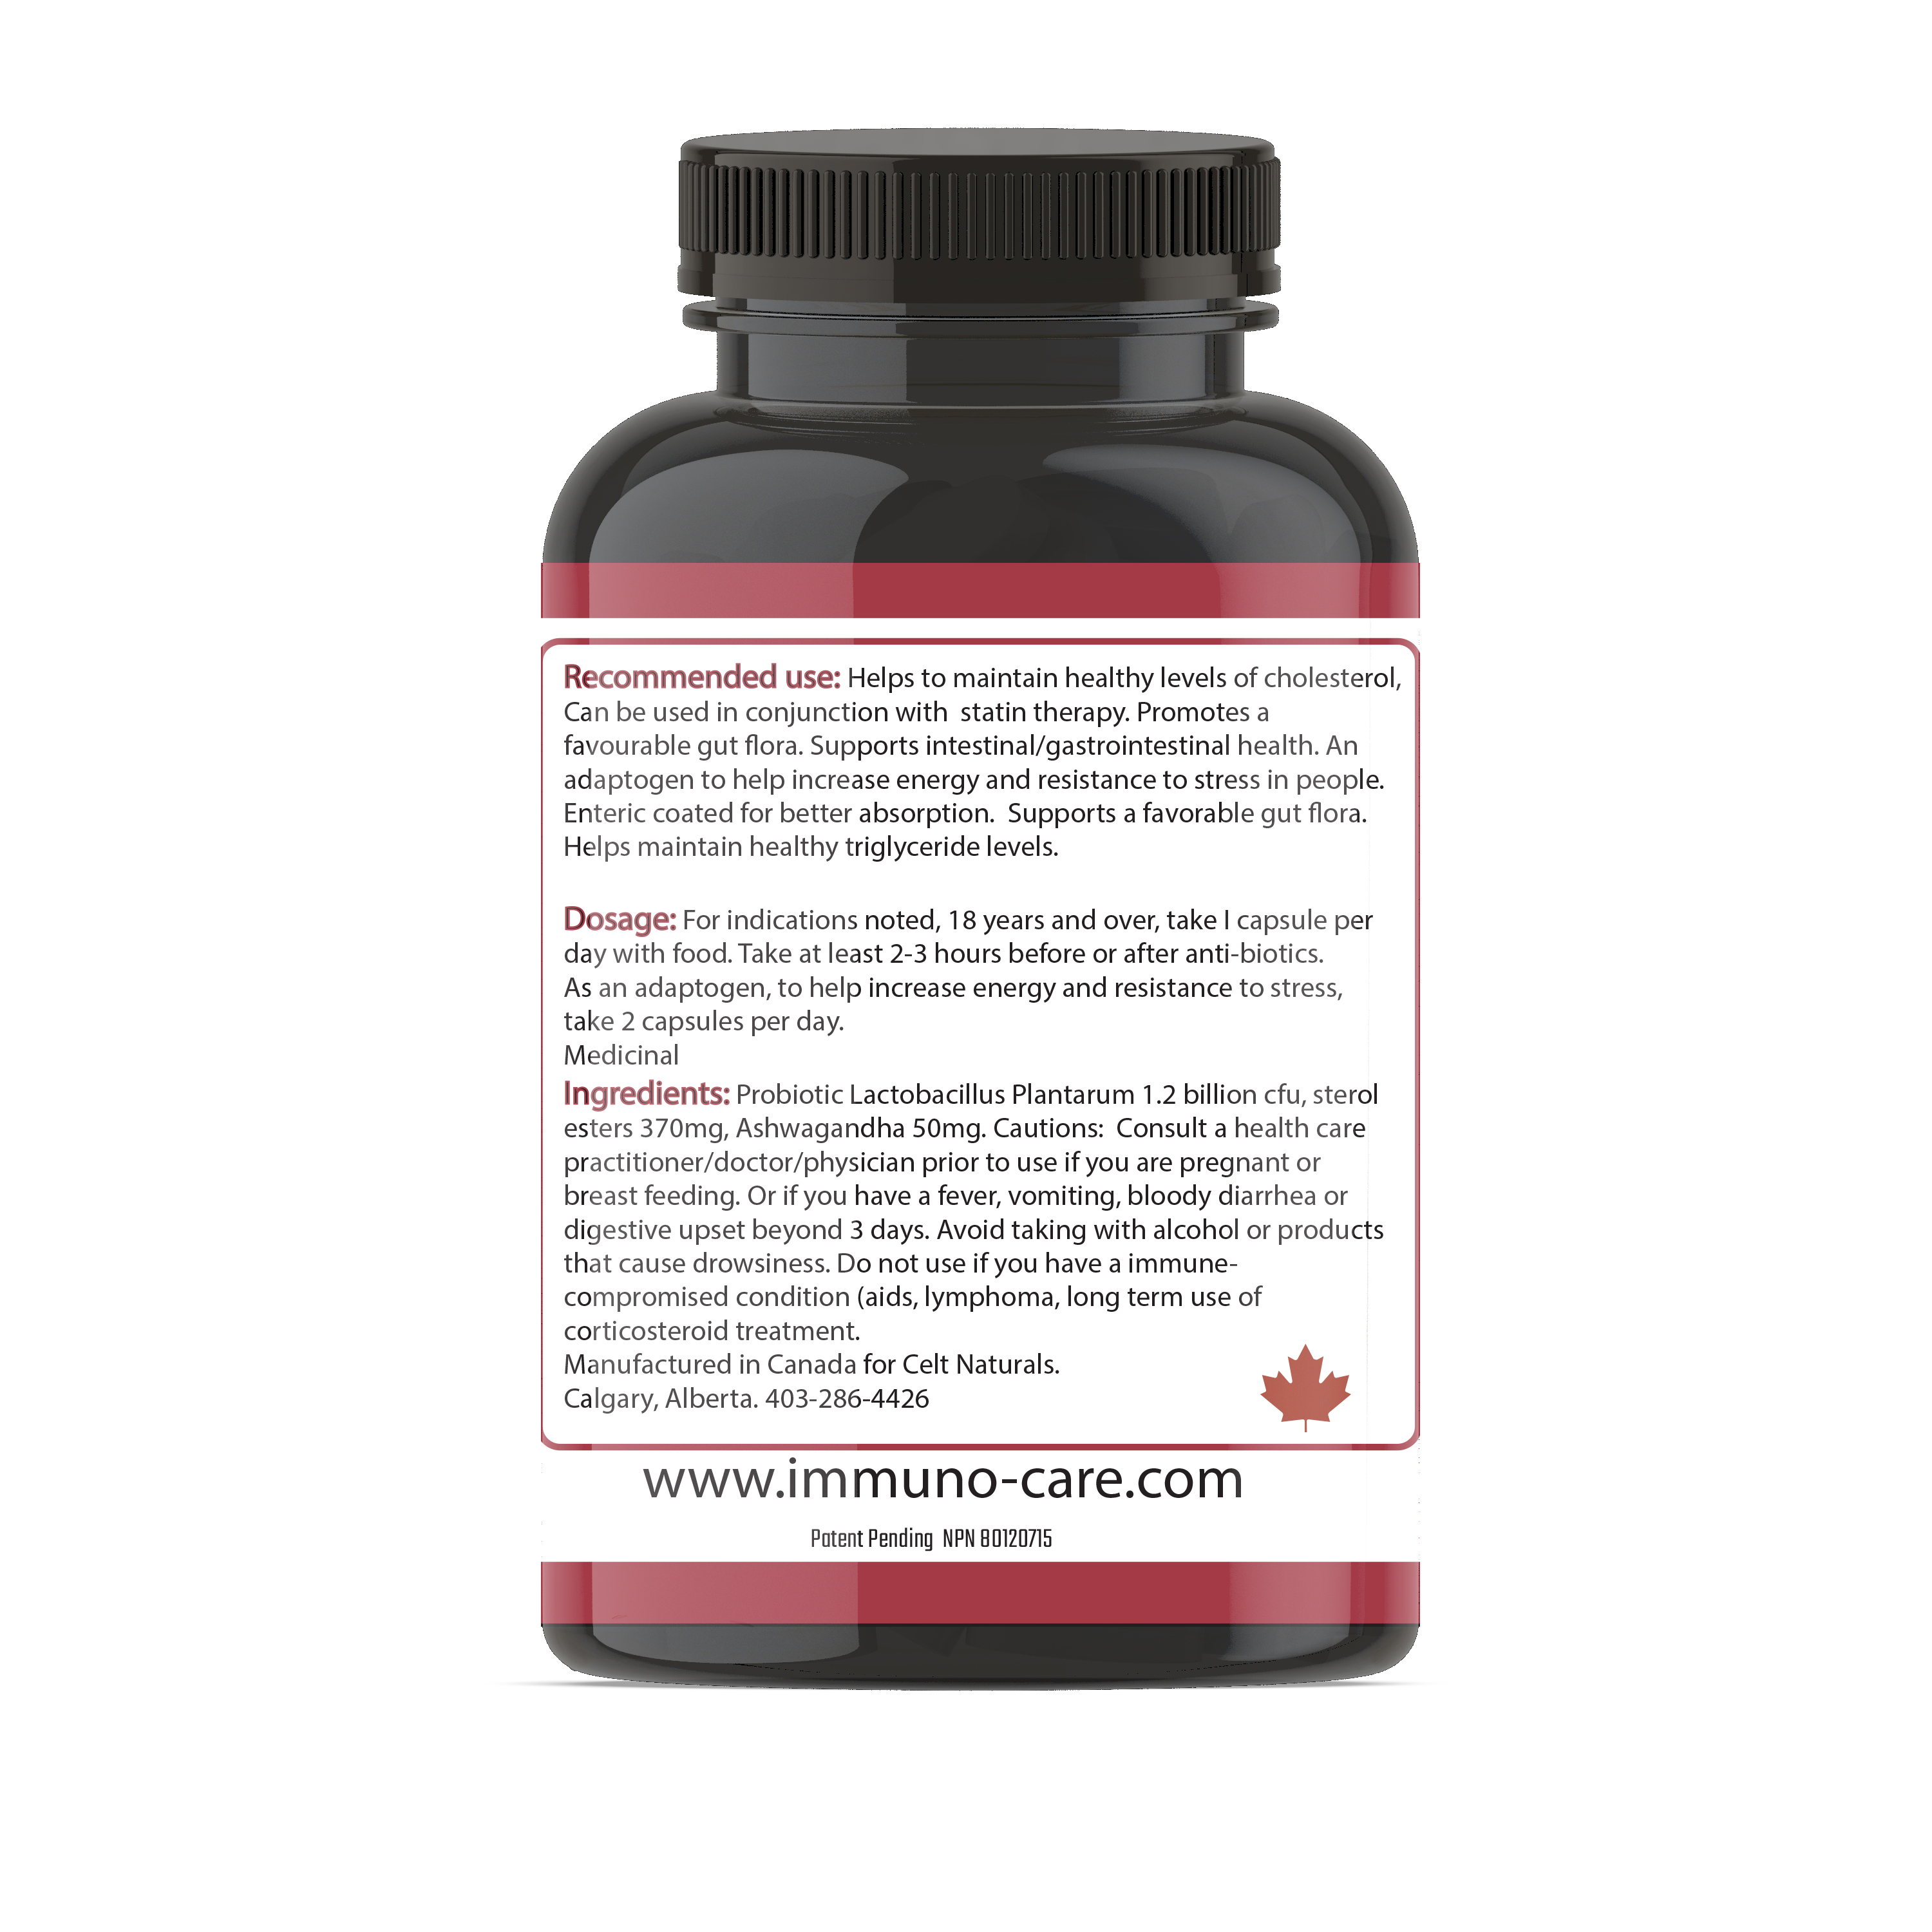 A Natural Supplement bottle and box that is a Statin Substitute, Heart Probiotic and Plant sterol with Ashwagandha